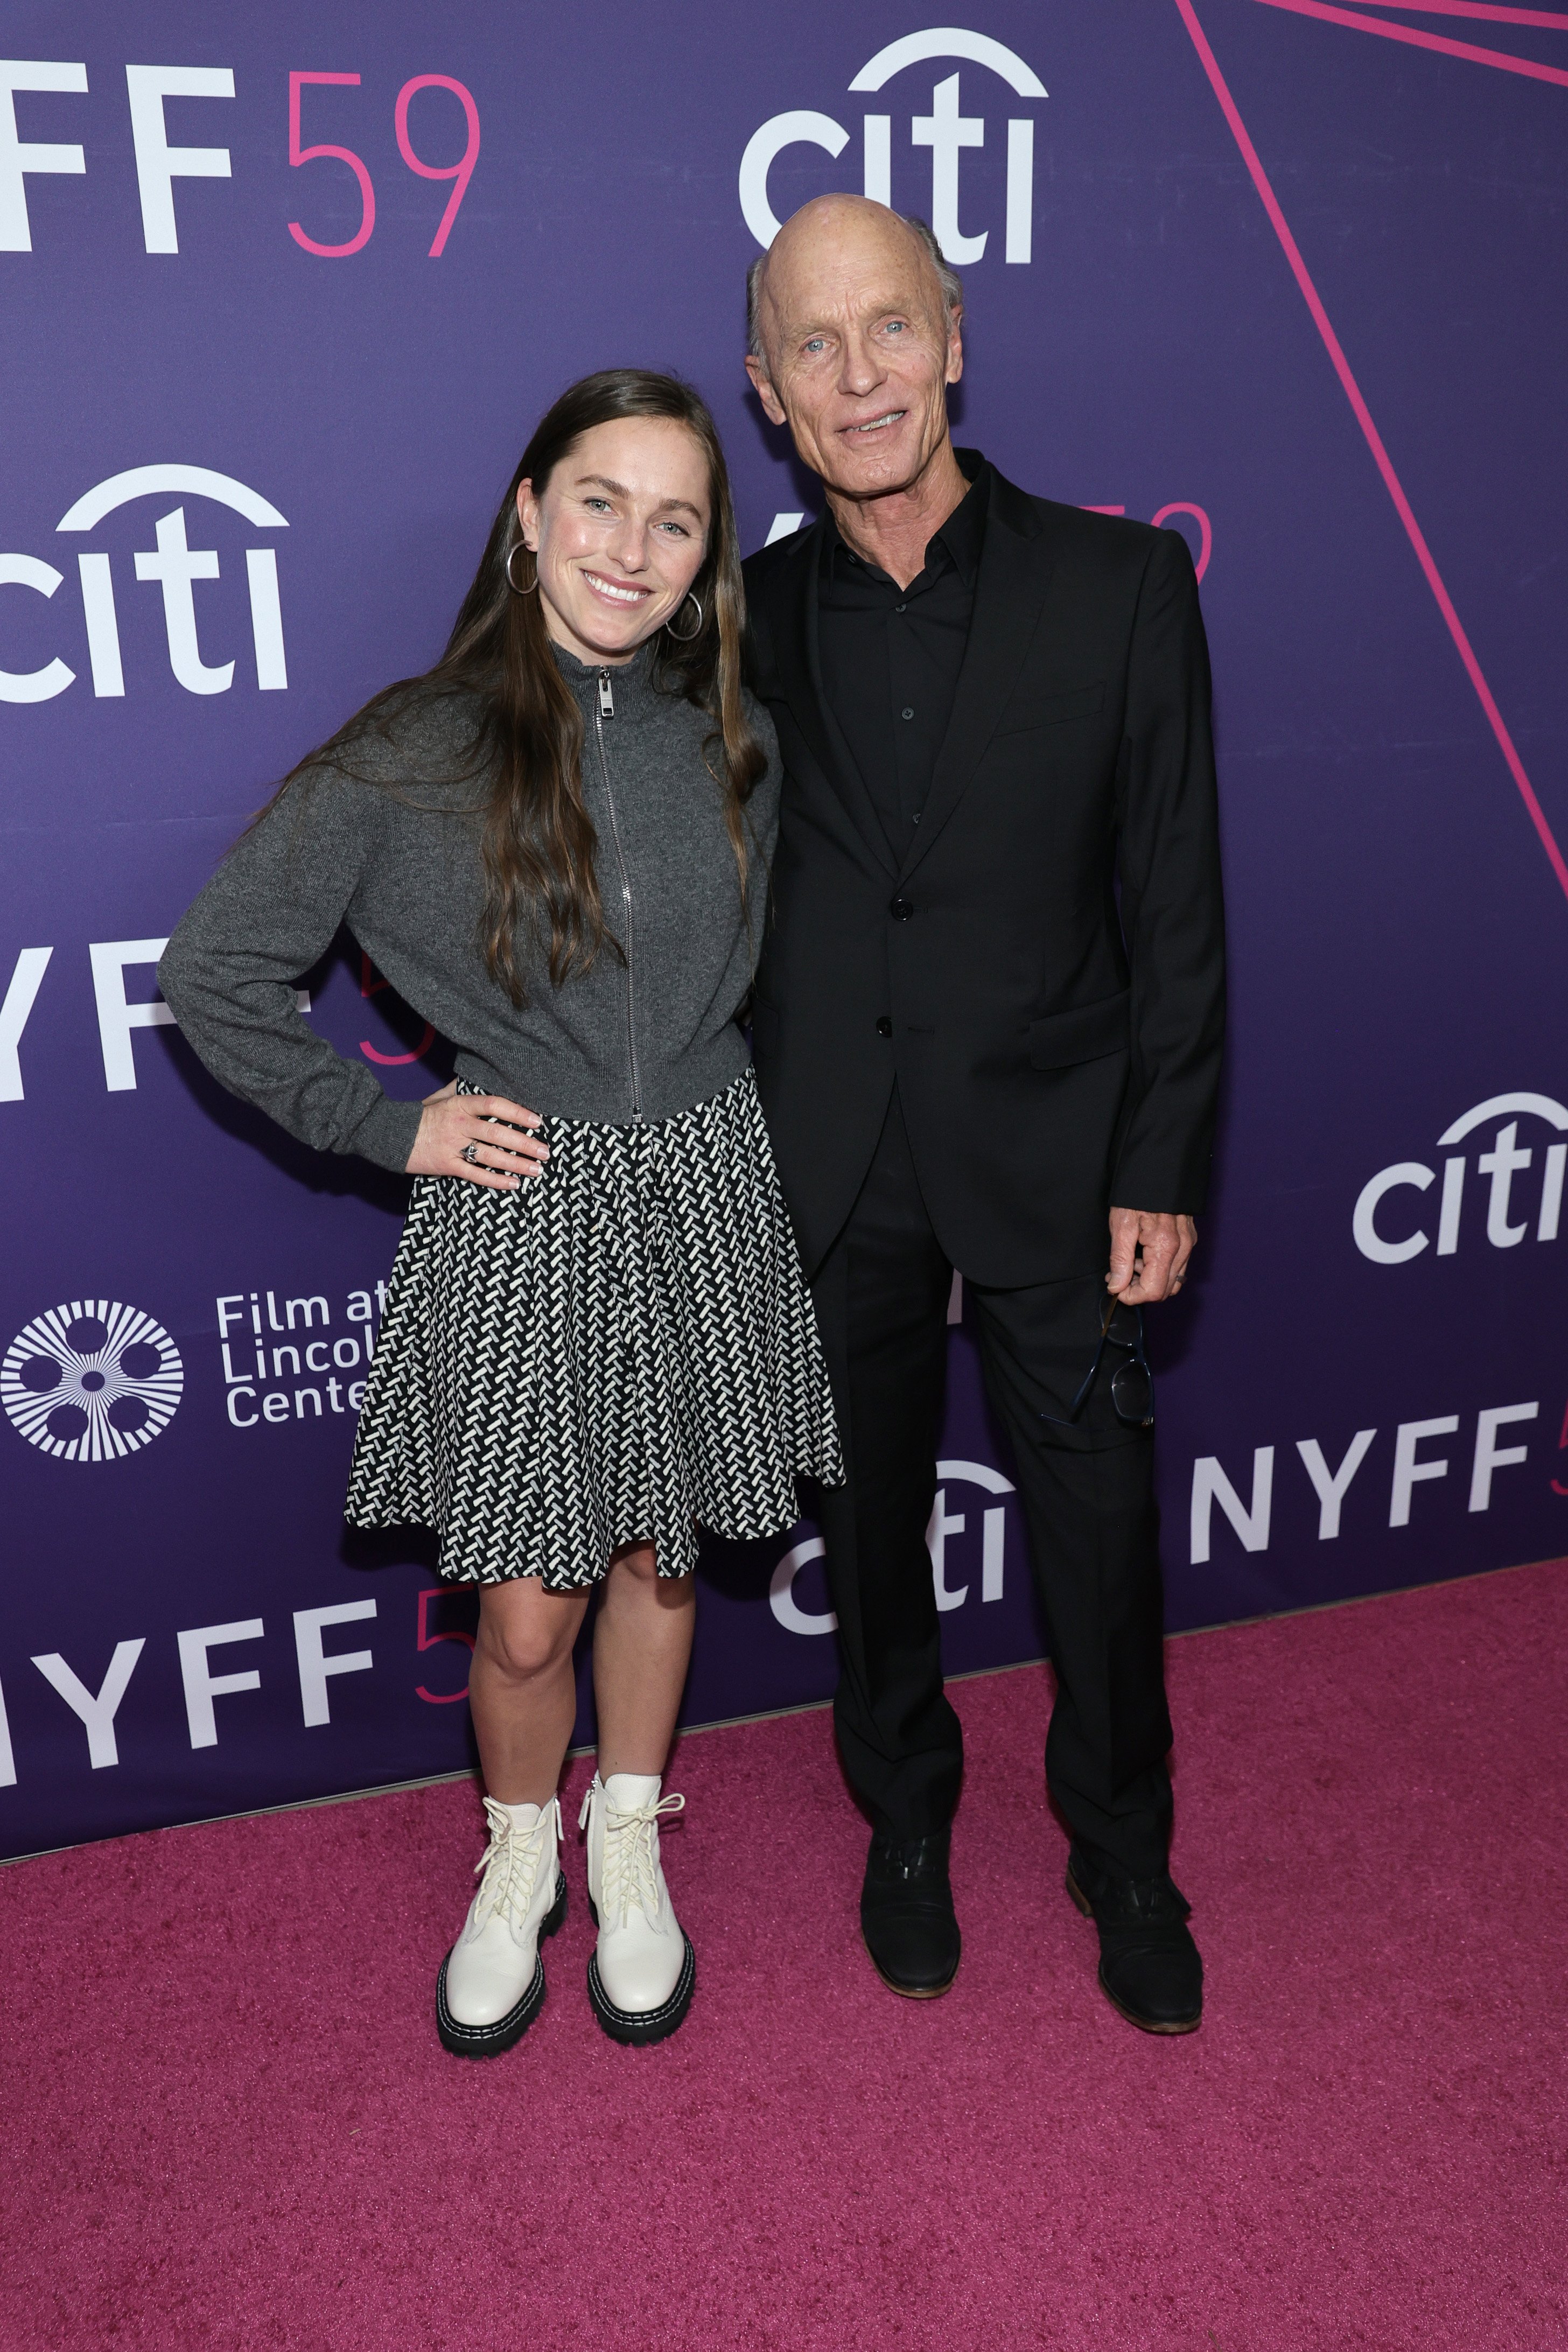 Lily Dolores Harris and Ed Harris attending the premiere of "The Lost Daughter" at Alice Tully Hall, New York City on September 29, 2021 | Source: Getty Images